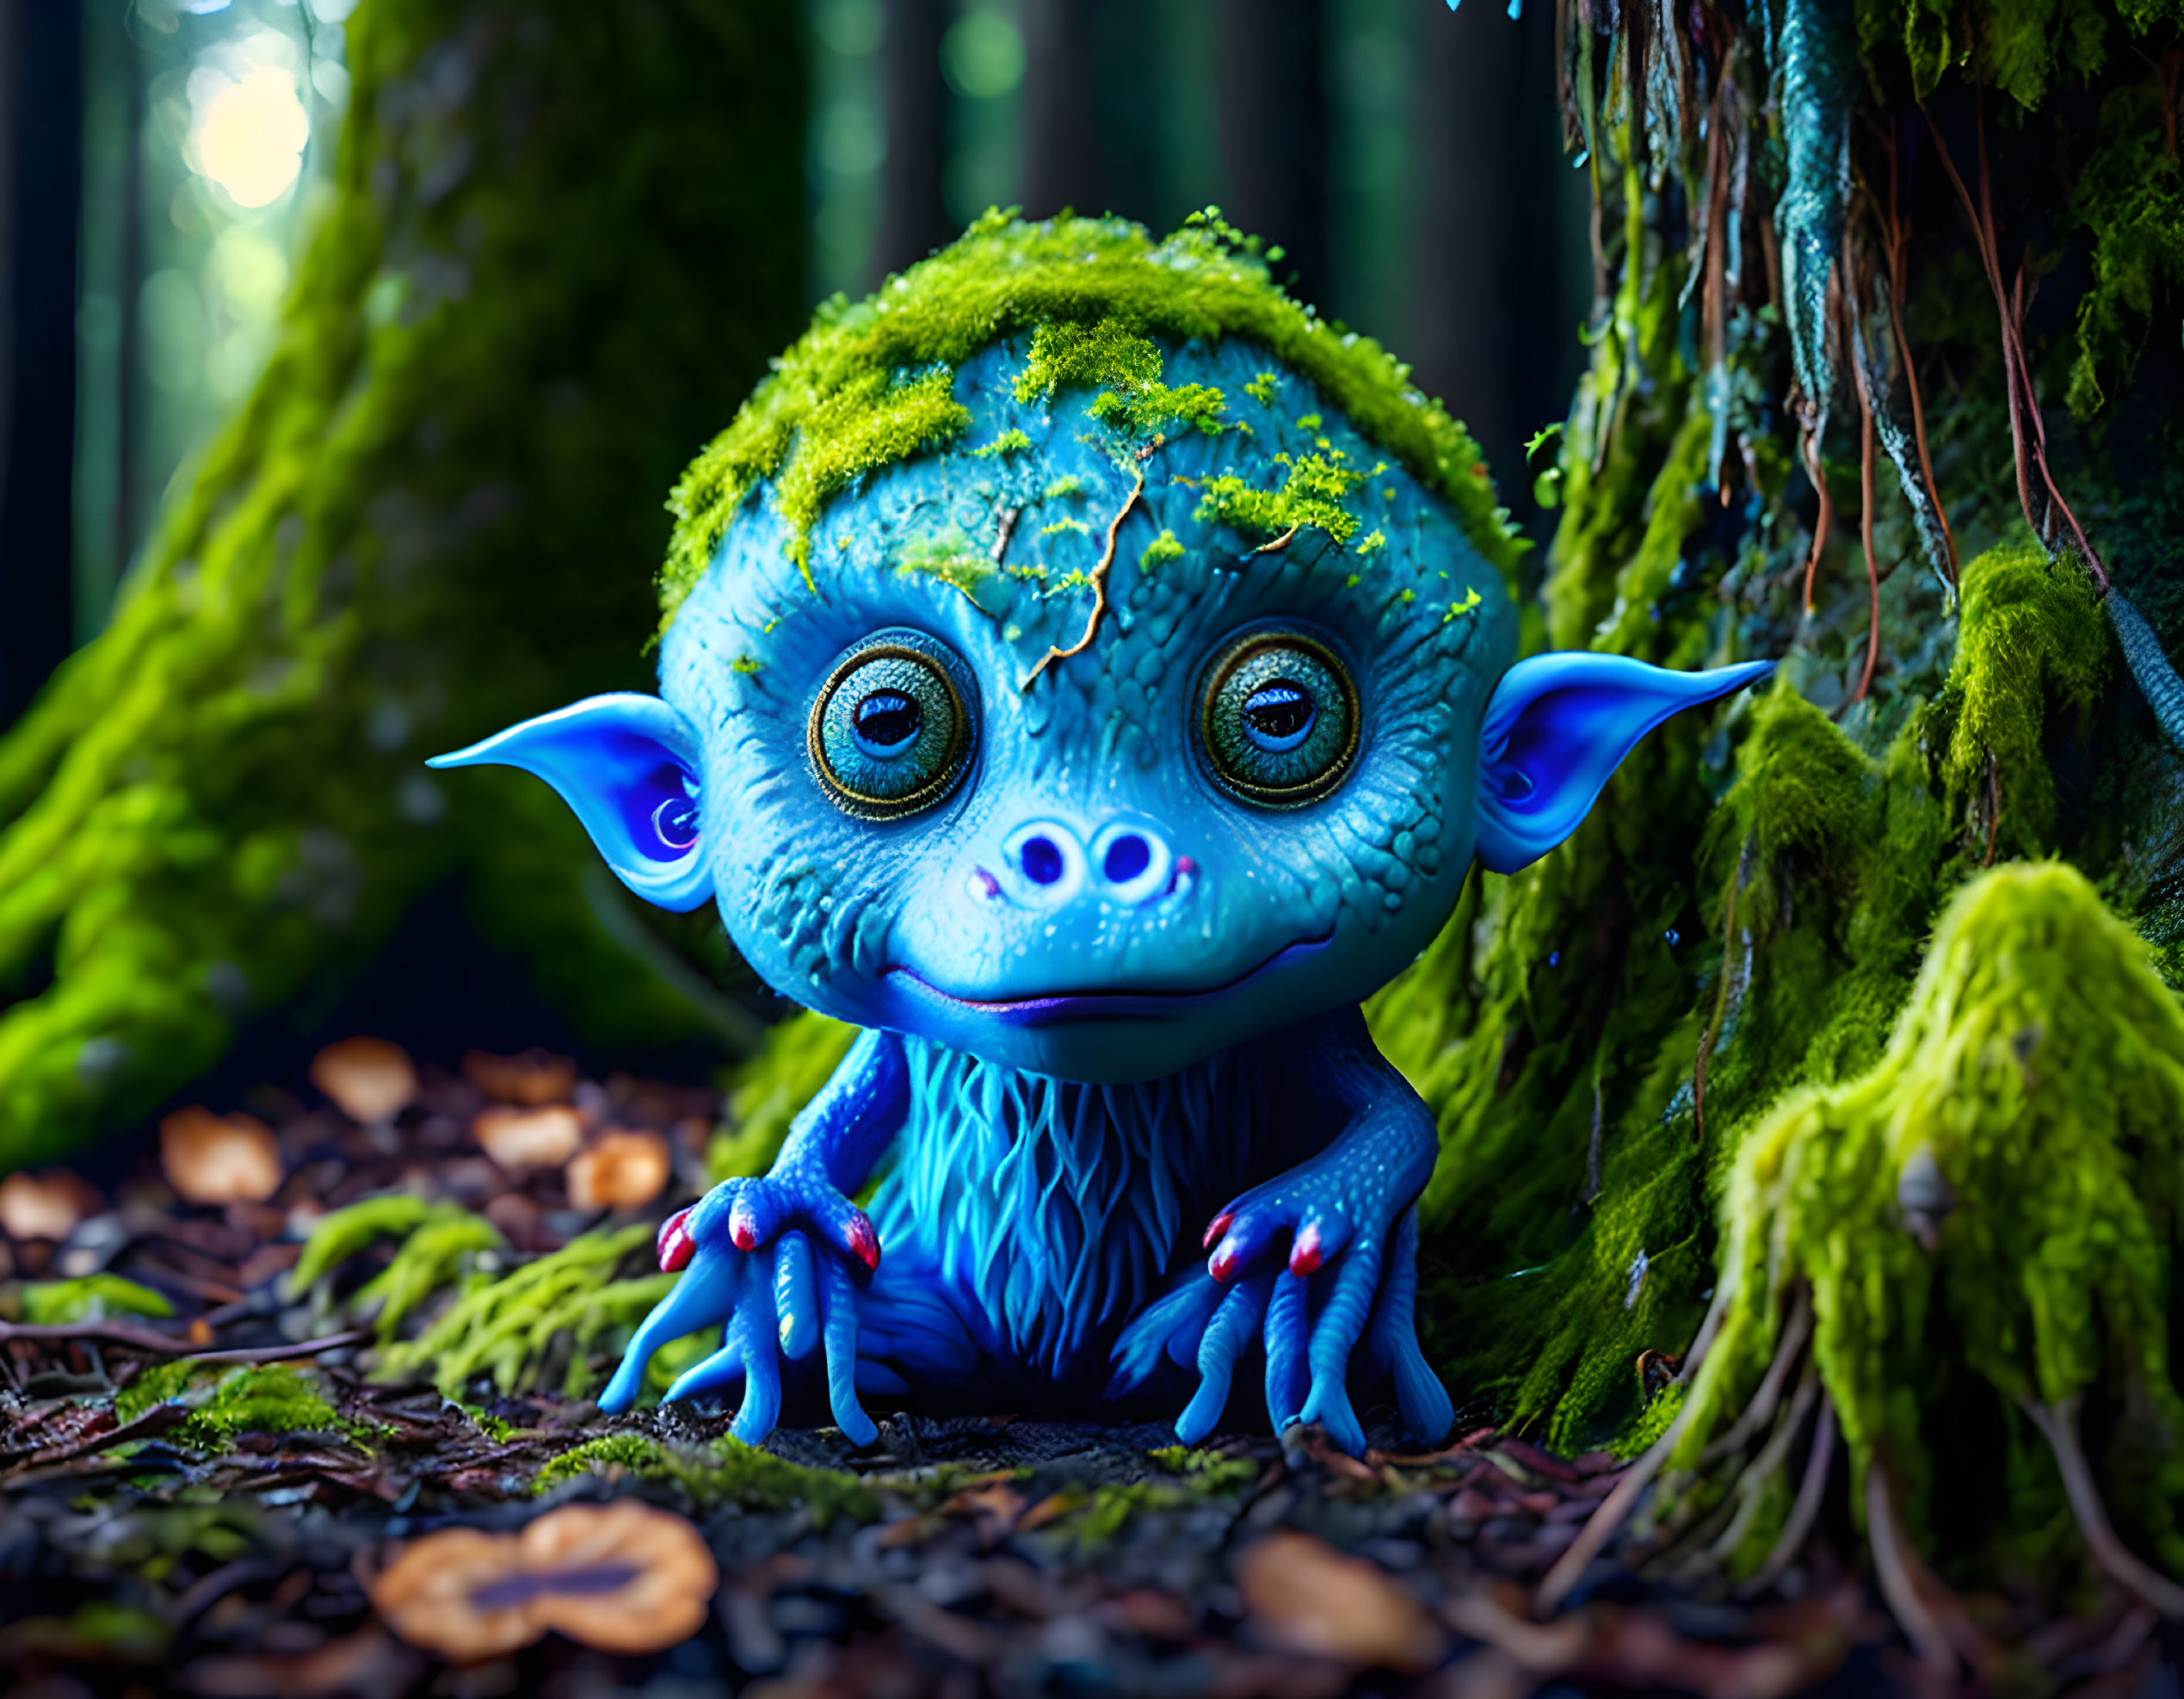 Blue creature with large ears in enchanted forest with mossy hair